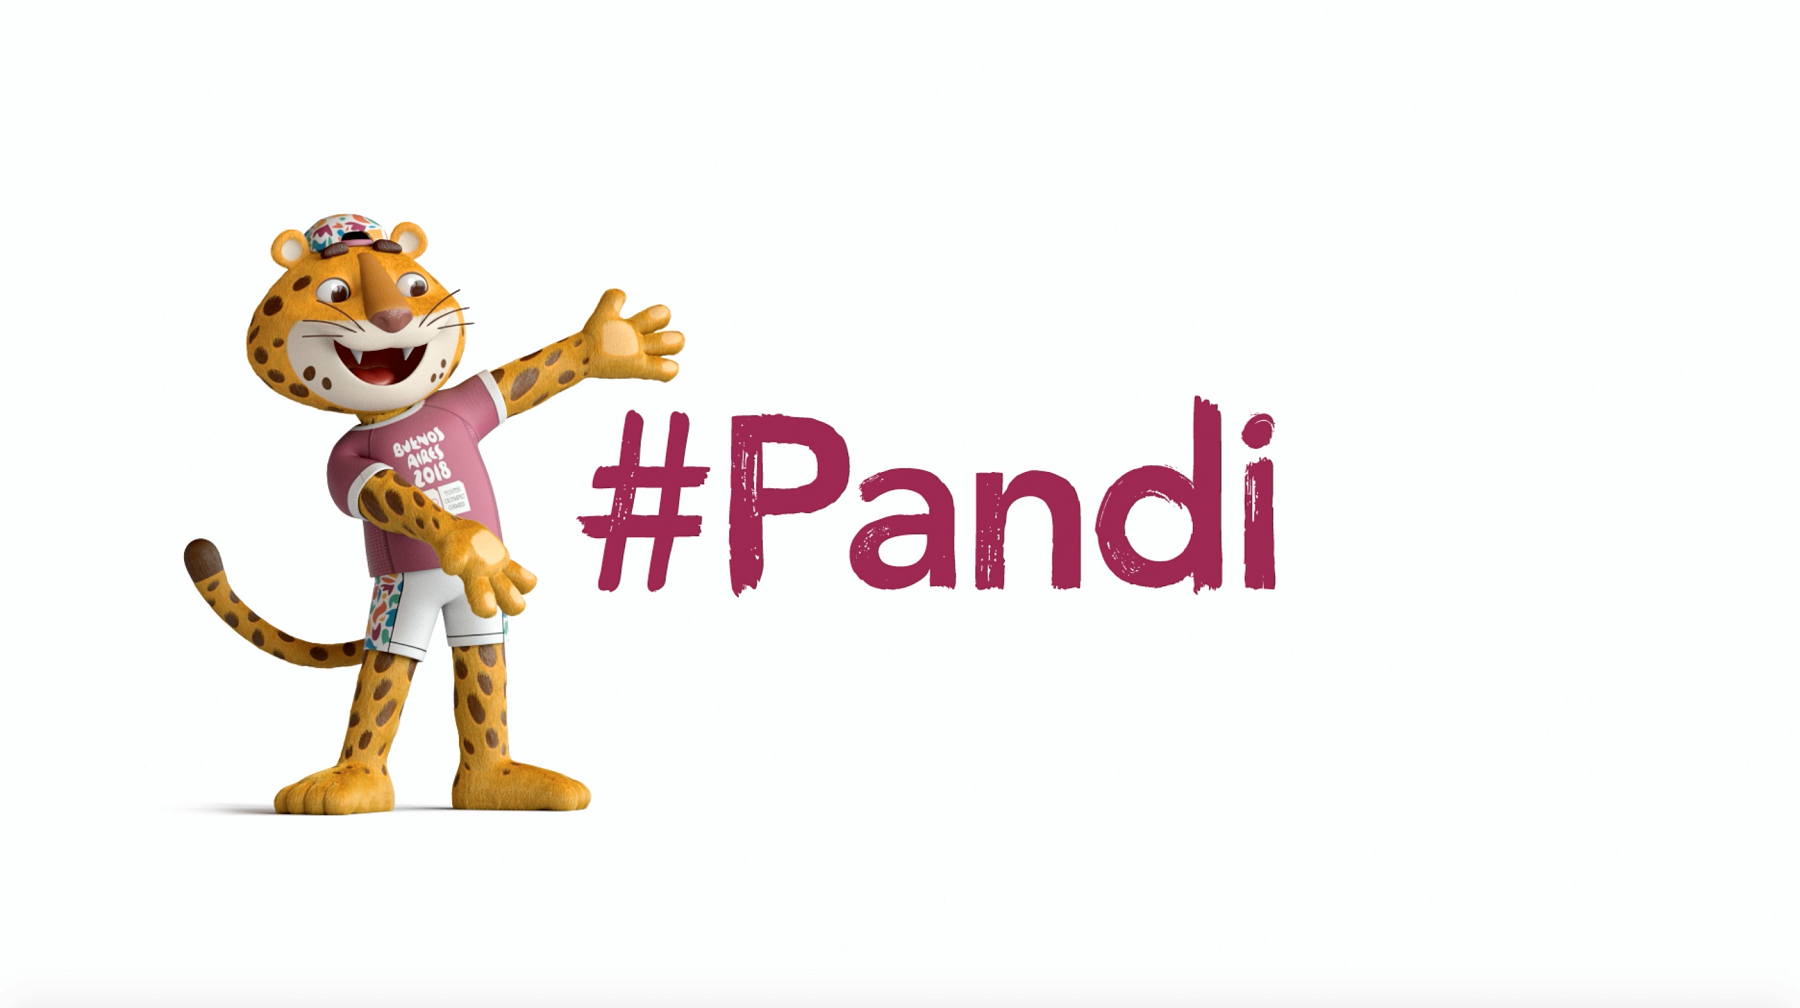 Buenos Aires 2018 has today unveiled its mascot for the Summer Youth Olympic Games, #Pandi the jaguar ©Buenos Aires 2018